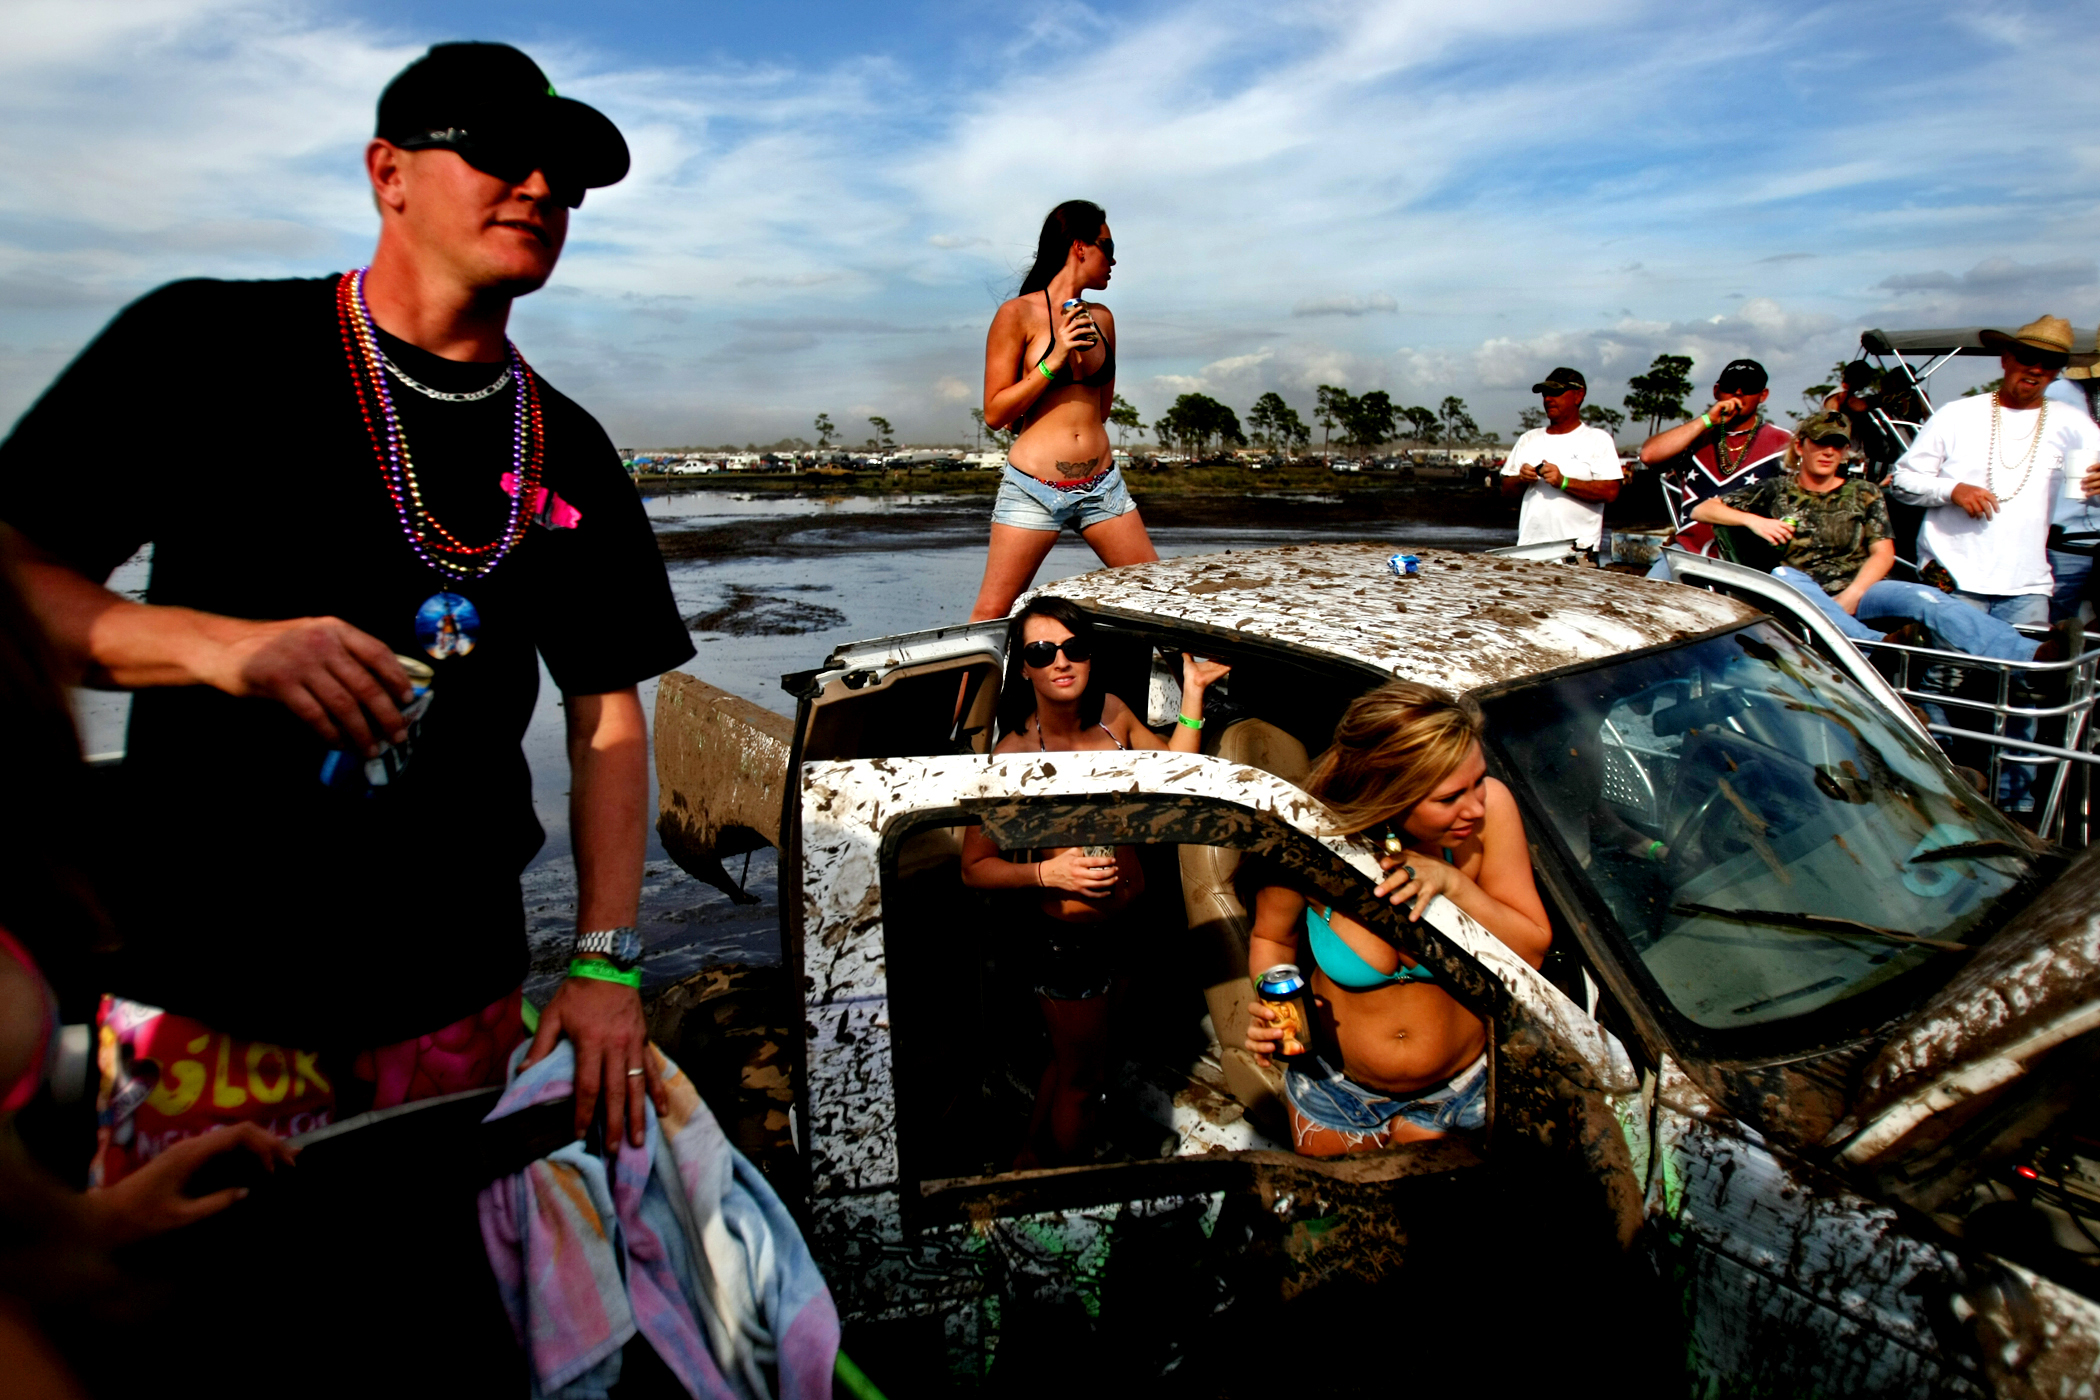 The mud bog is party central throughout the day. 